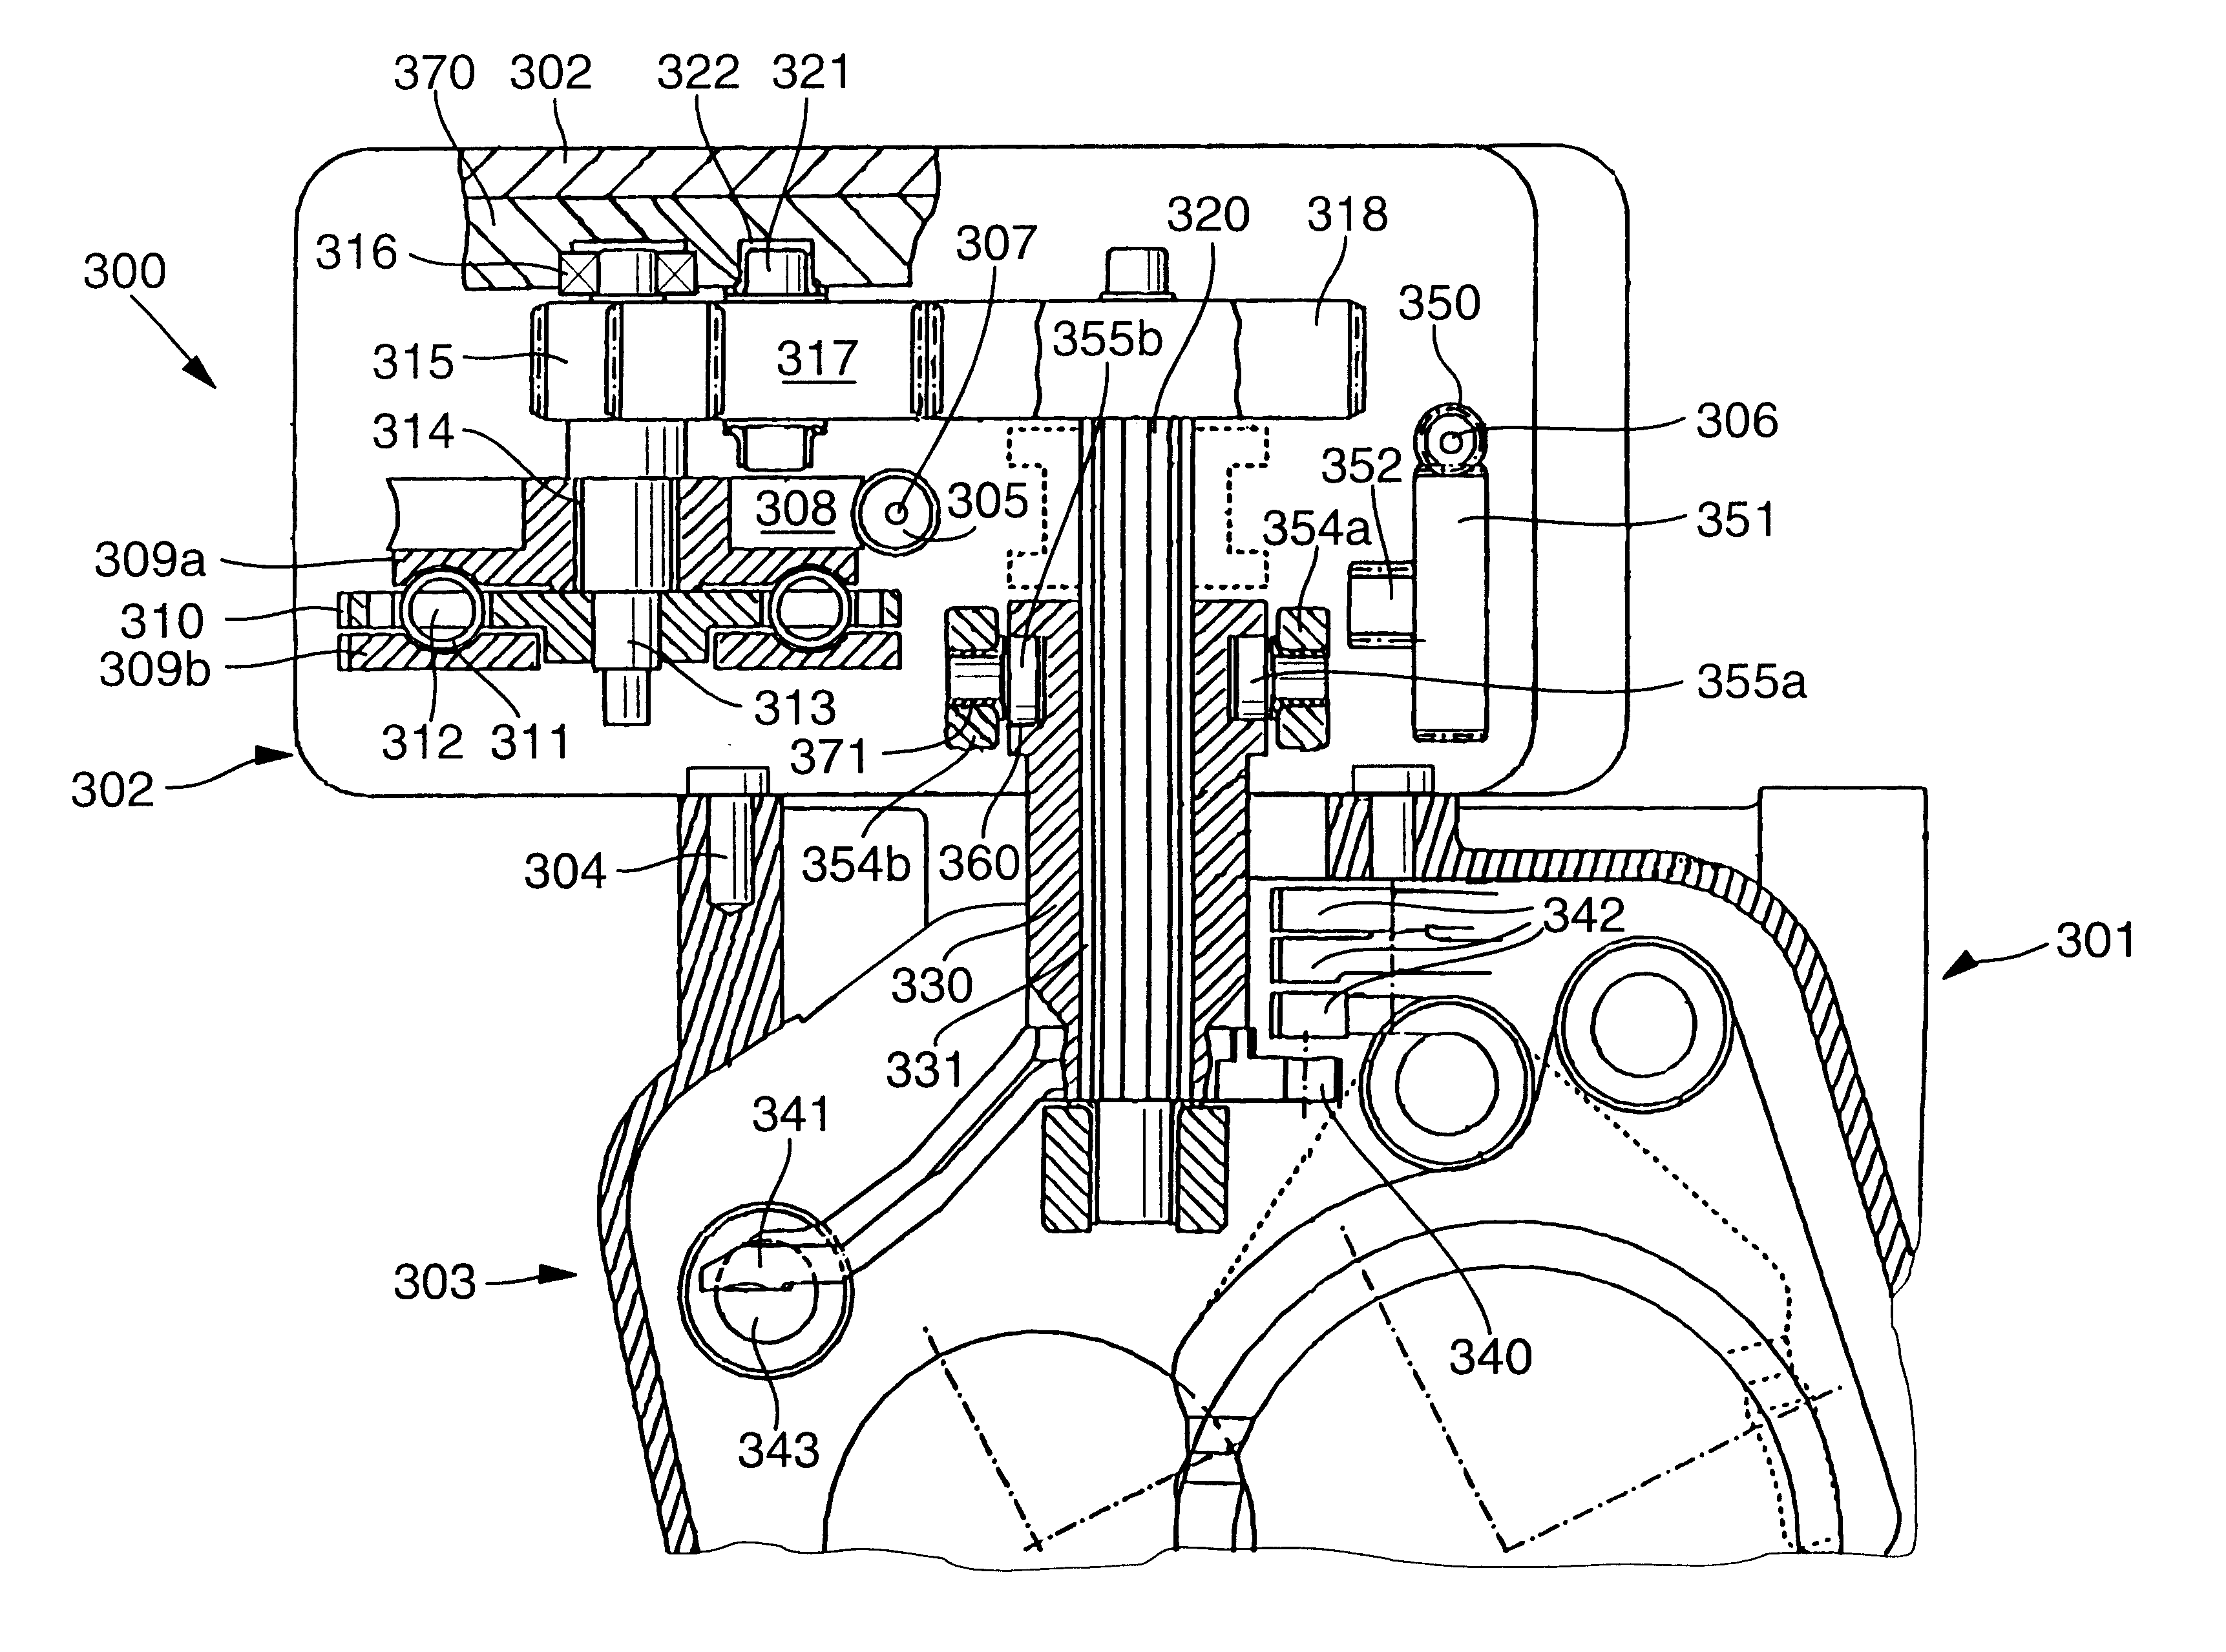 Actuating apparatus for automated constituents of power trains in motor vehicles